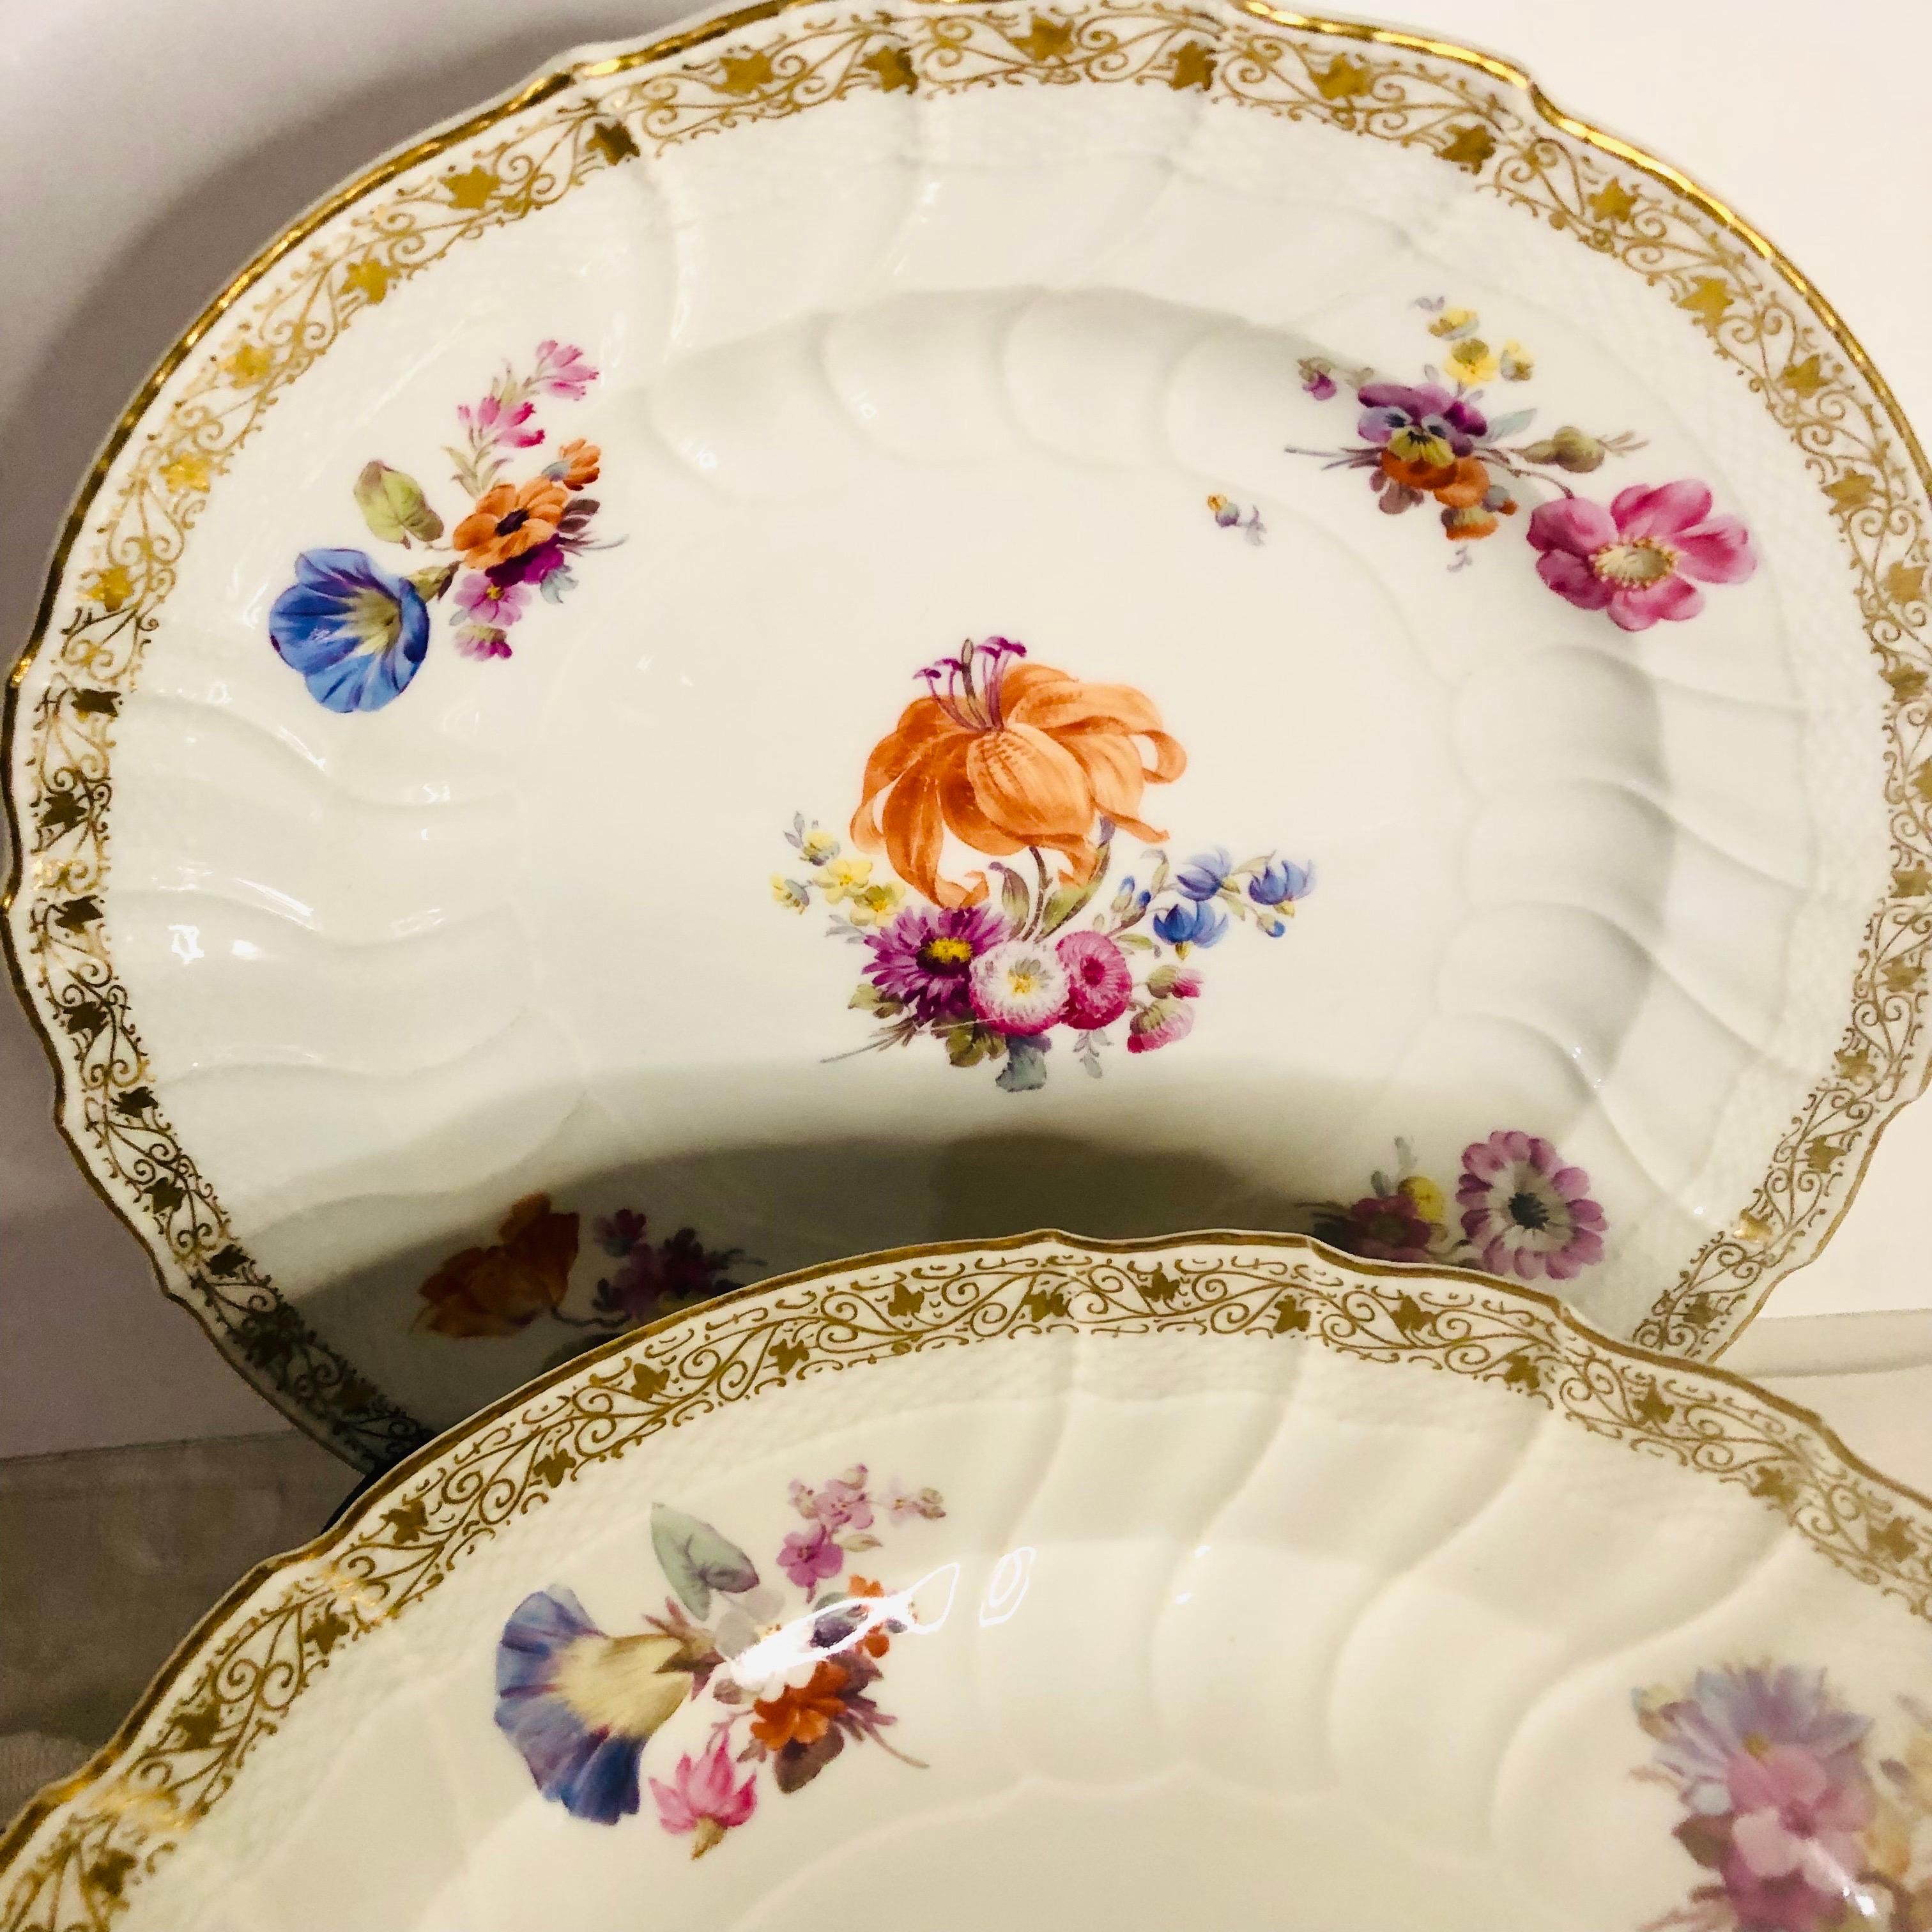 12 KPM Dinner Plates, Each Hand-Painted with a Different Central Flower Bouquet For Sale 8